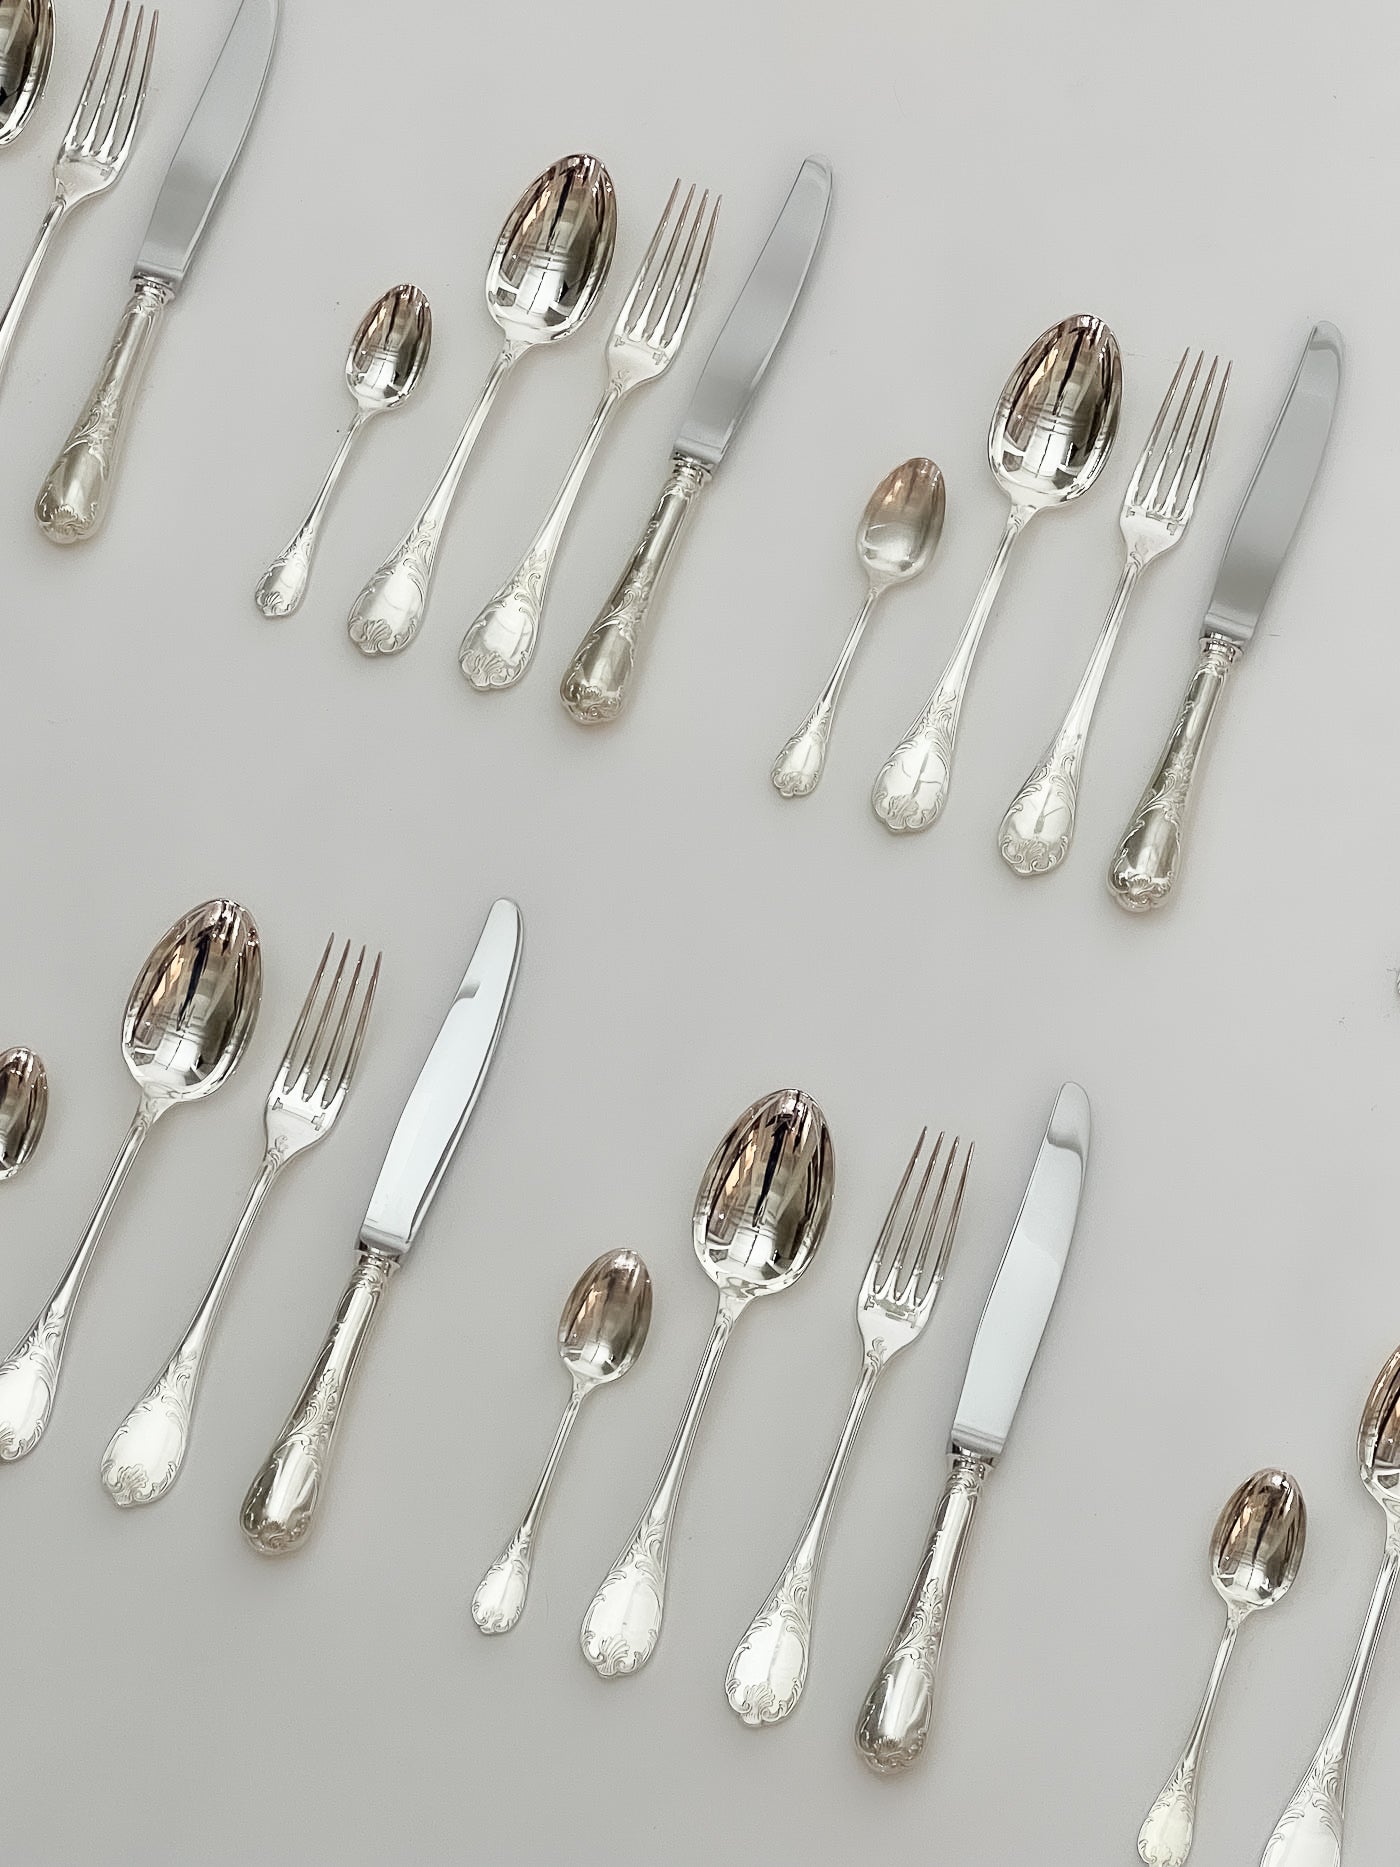 Christofle cutlery 48 pieces